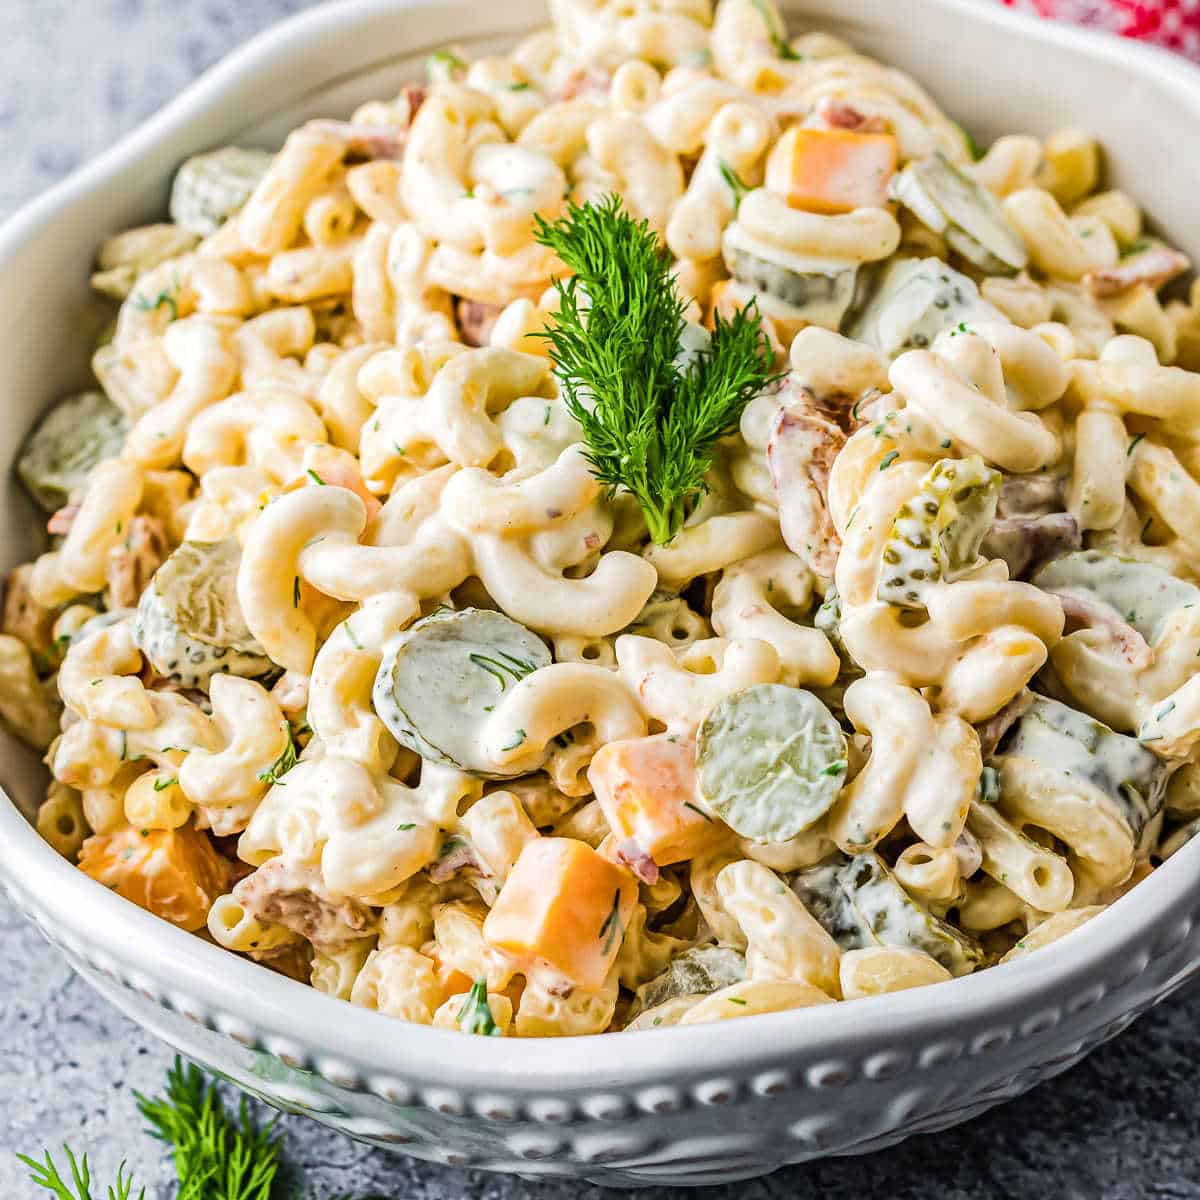 bowl of dill pickle pasta salad